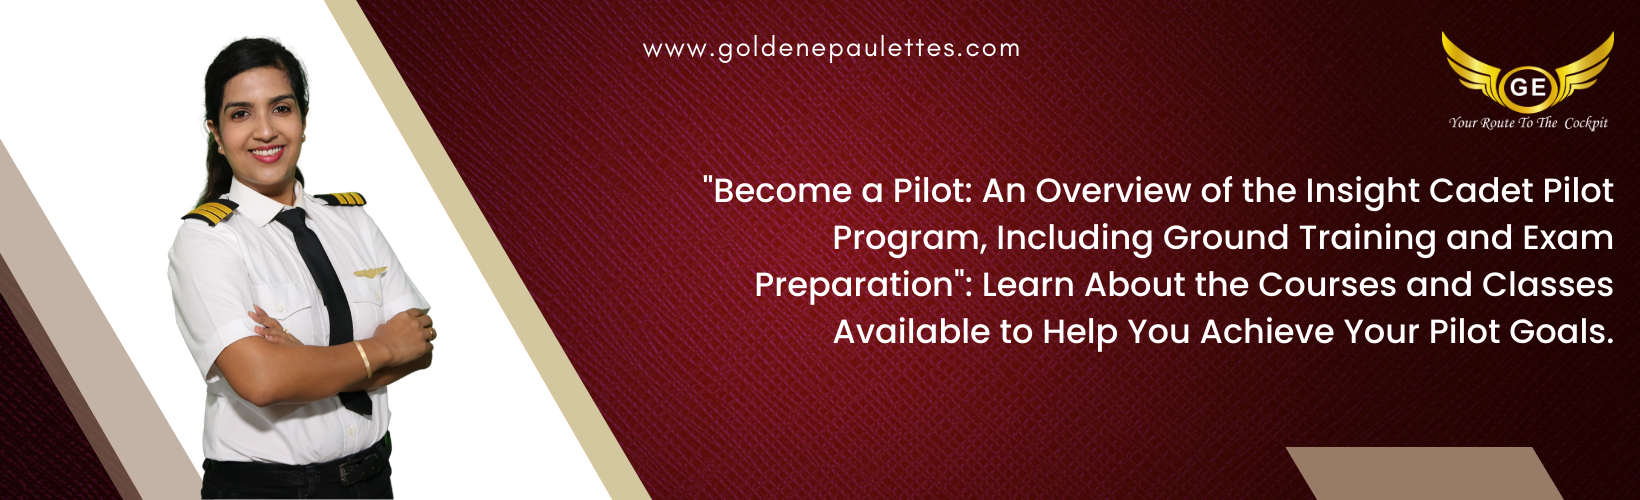 The Various Courses and Classes Available in the Insight Cadet Pilot Program